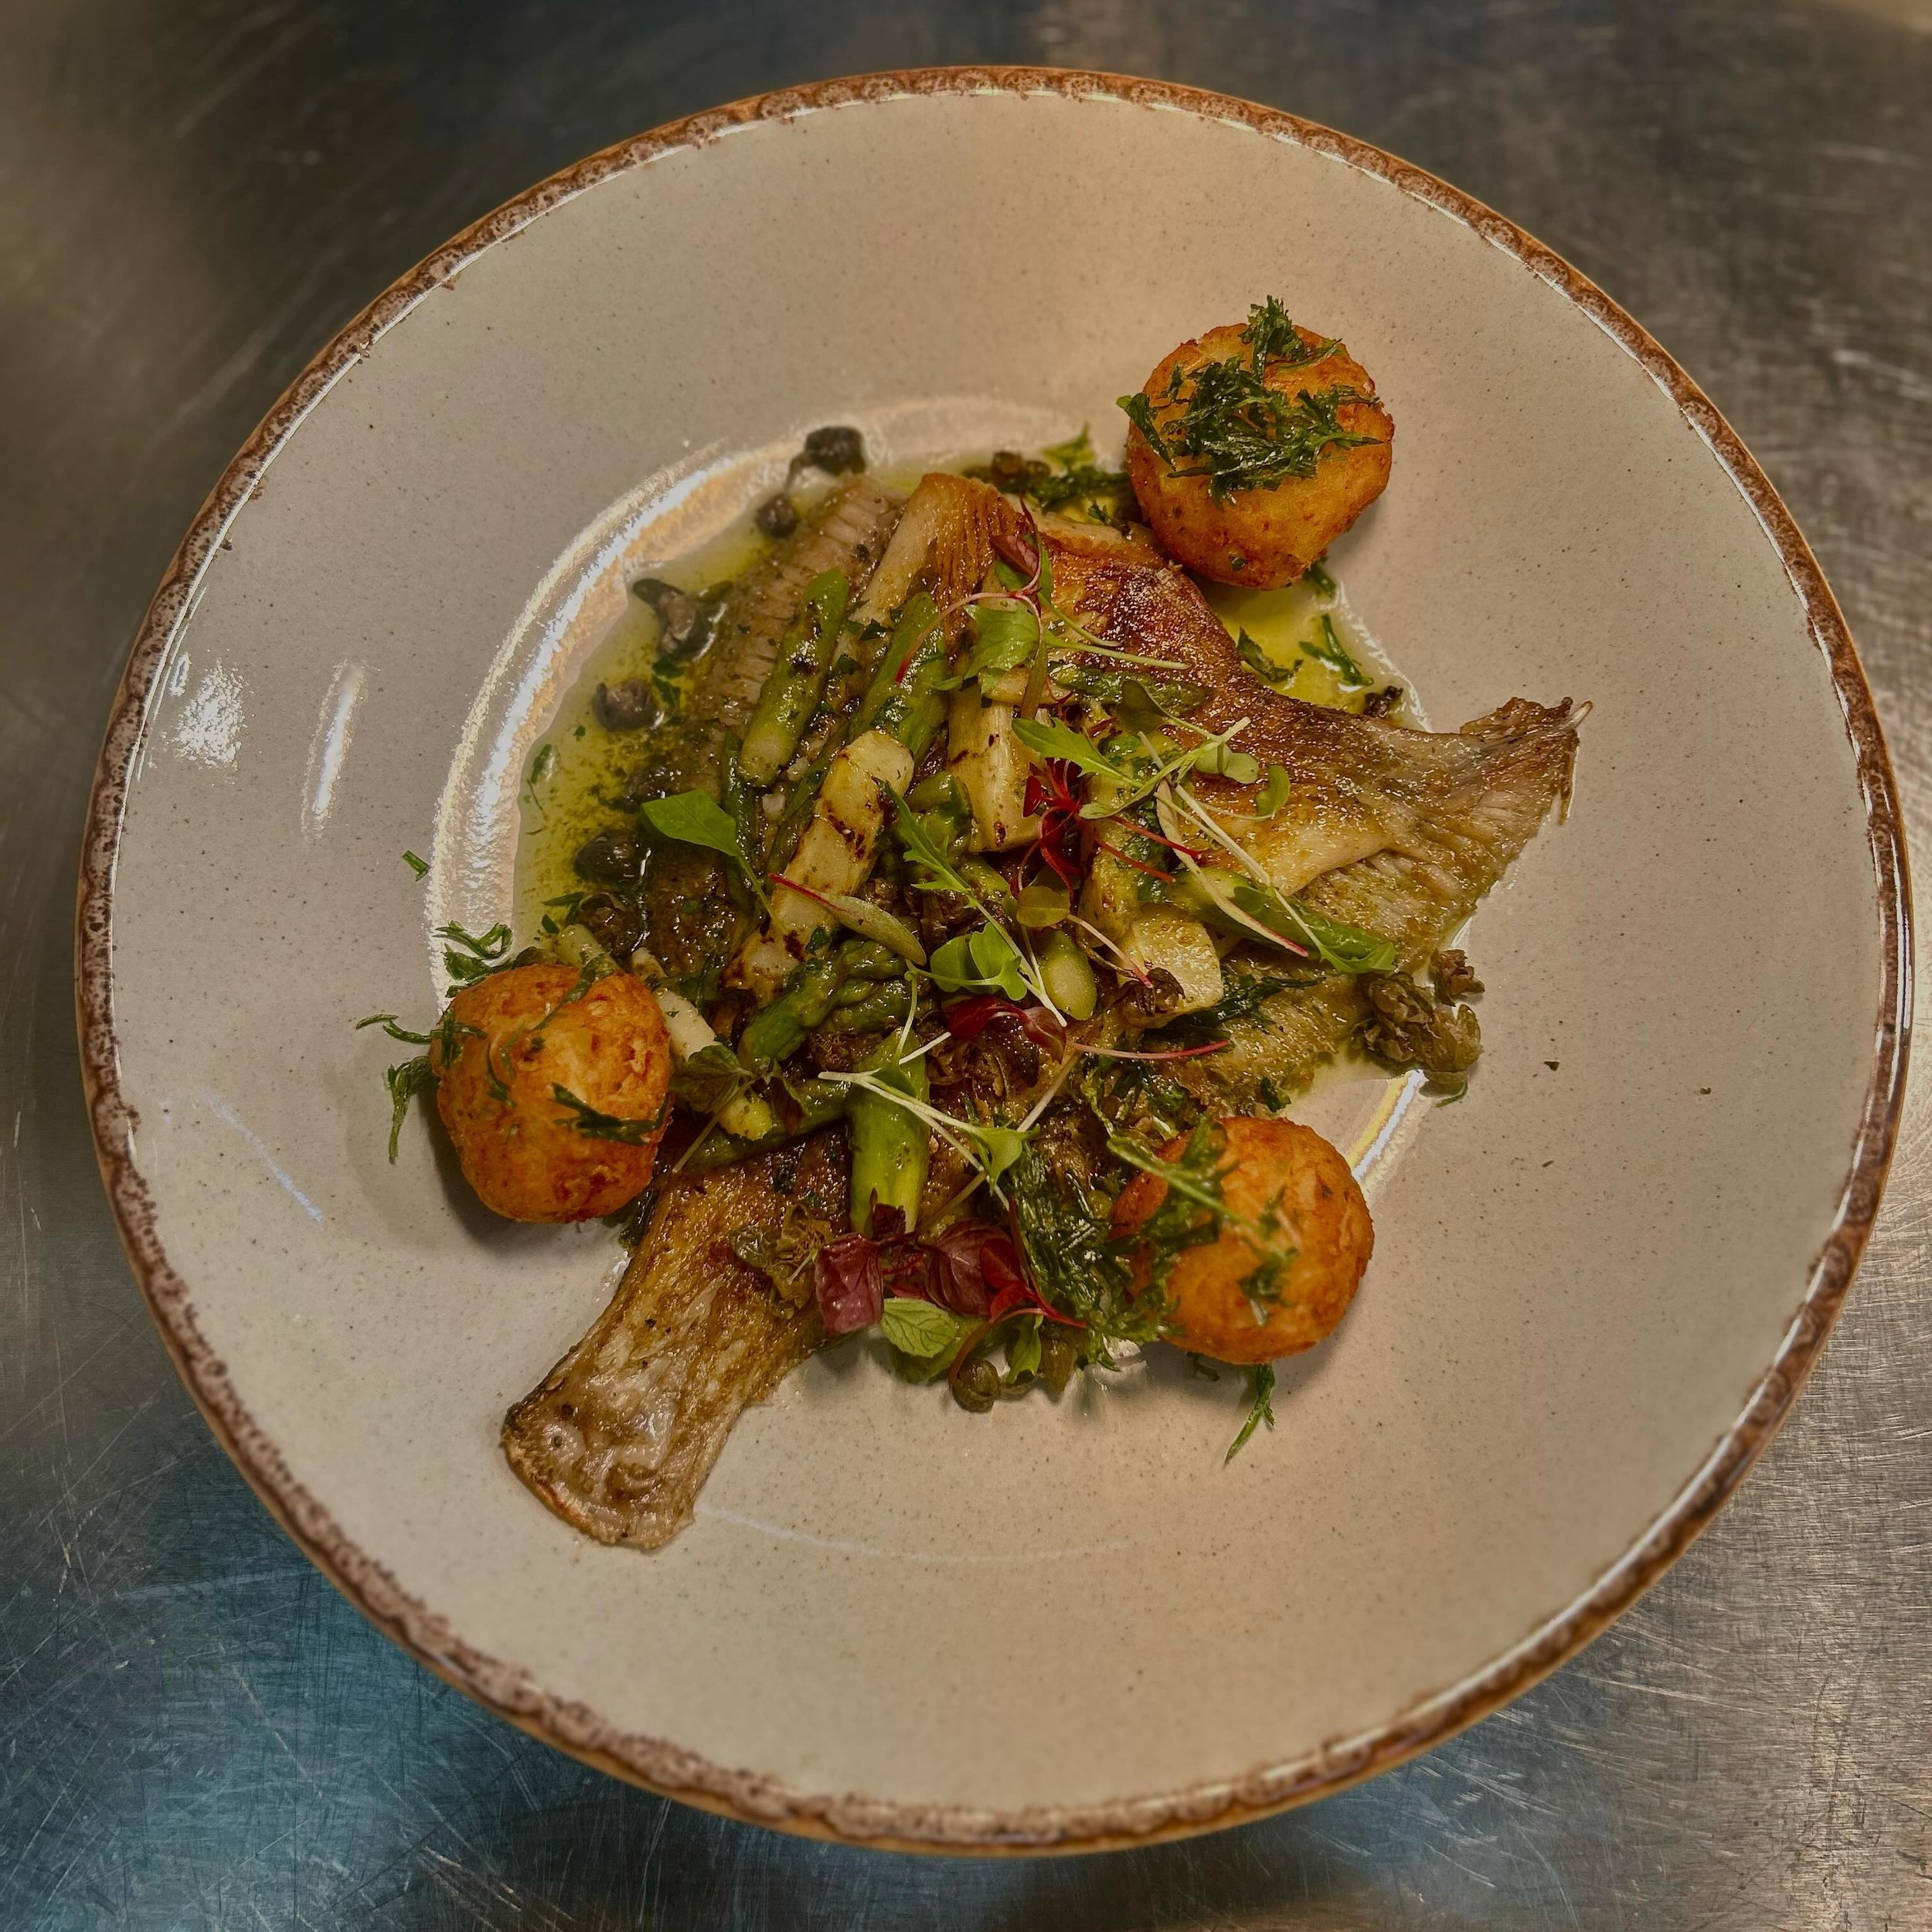 River Blackwater Plaice with smoked cheddar hashbrown&rsquo;s, local asparagus and broccoli stalks - our special from last week, wonder what it will be this week! 

#anchorinn #anchorinnpub #anchornayland #Nayland #Naylandsuffolk #suffolkcountyinns #